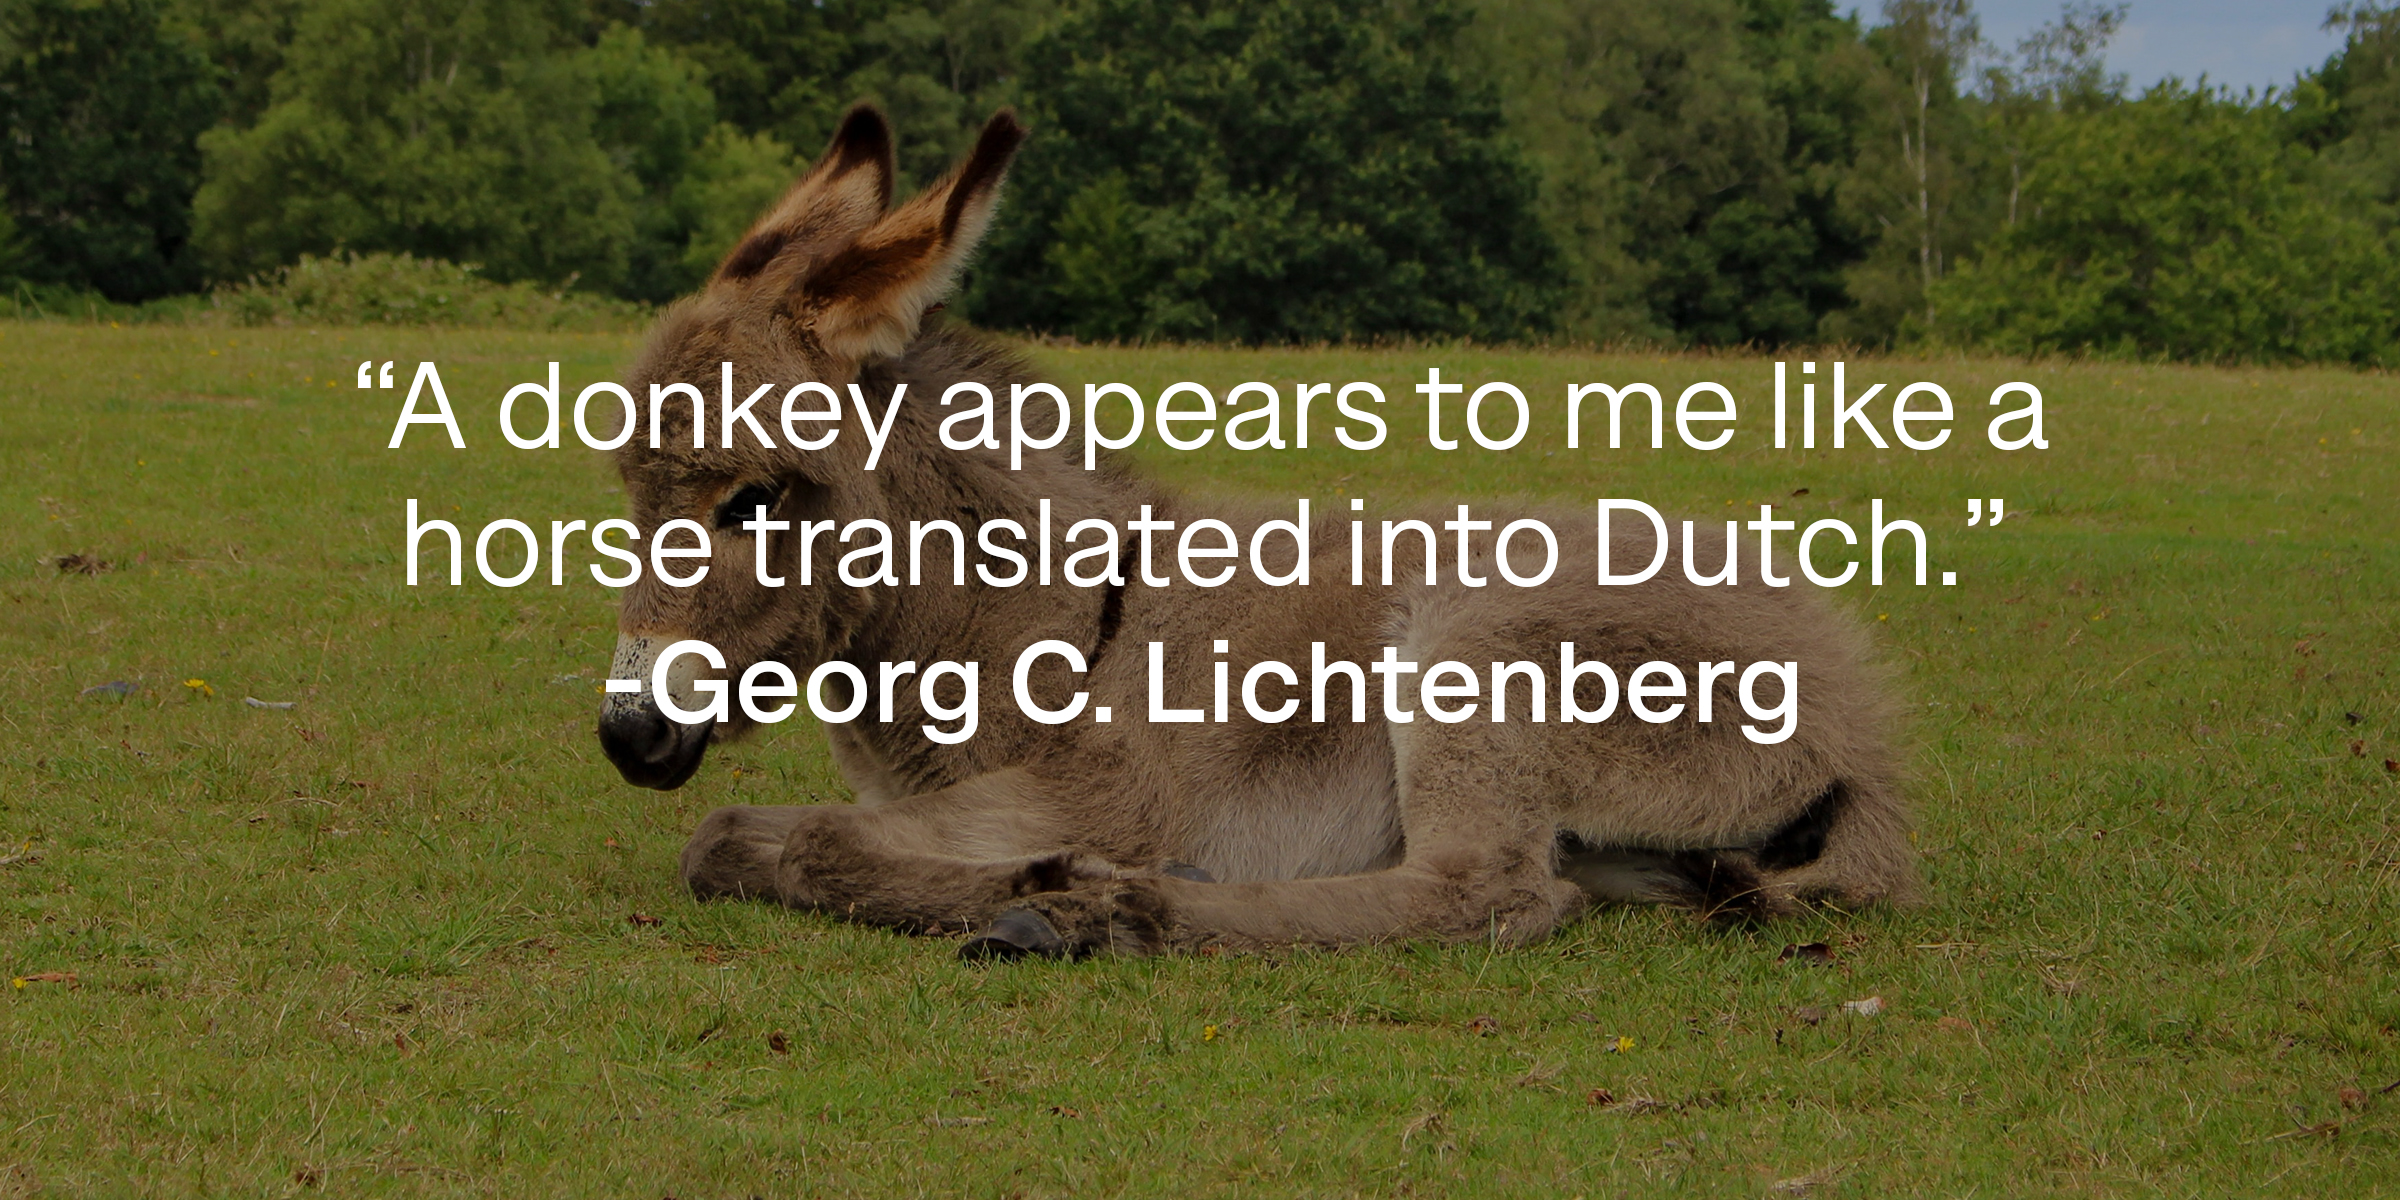 Georg C. Lichtenberg's quote: "A donkey appears to me like a horse translated into Dutch." | Source: Unsplash